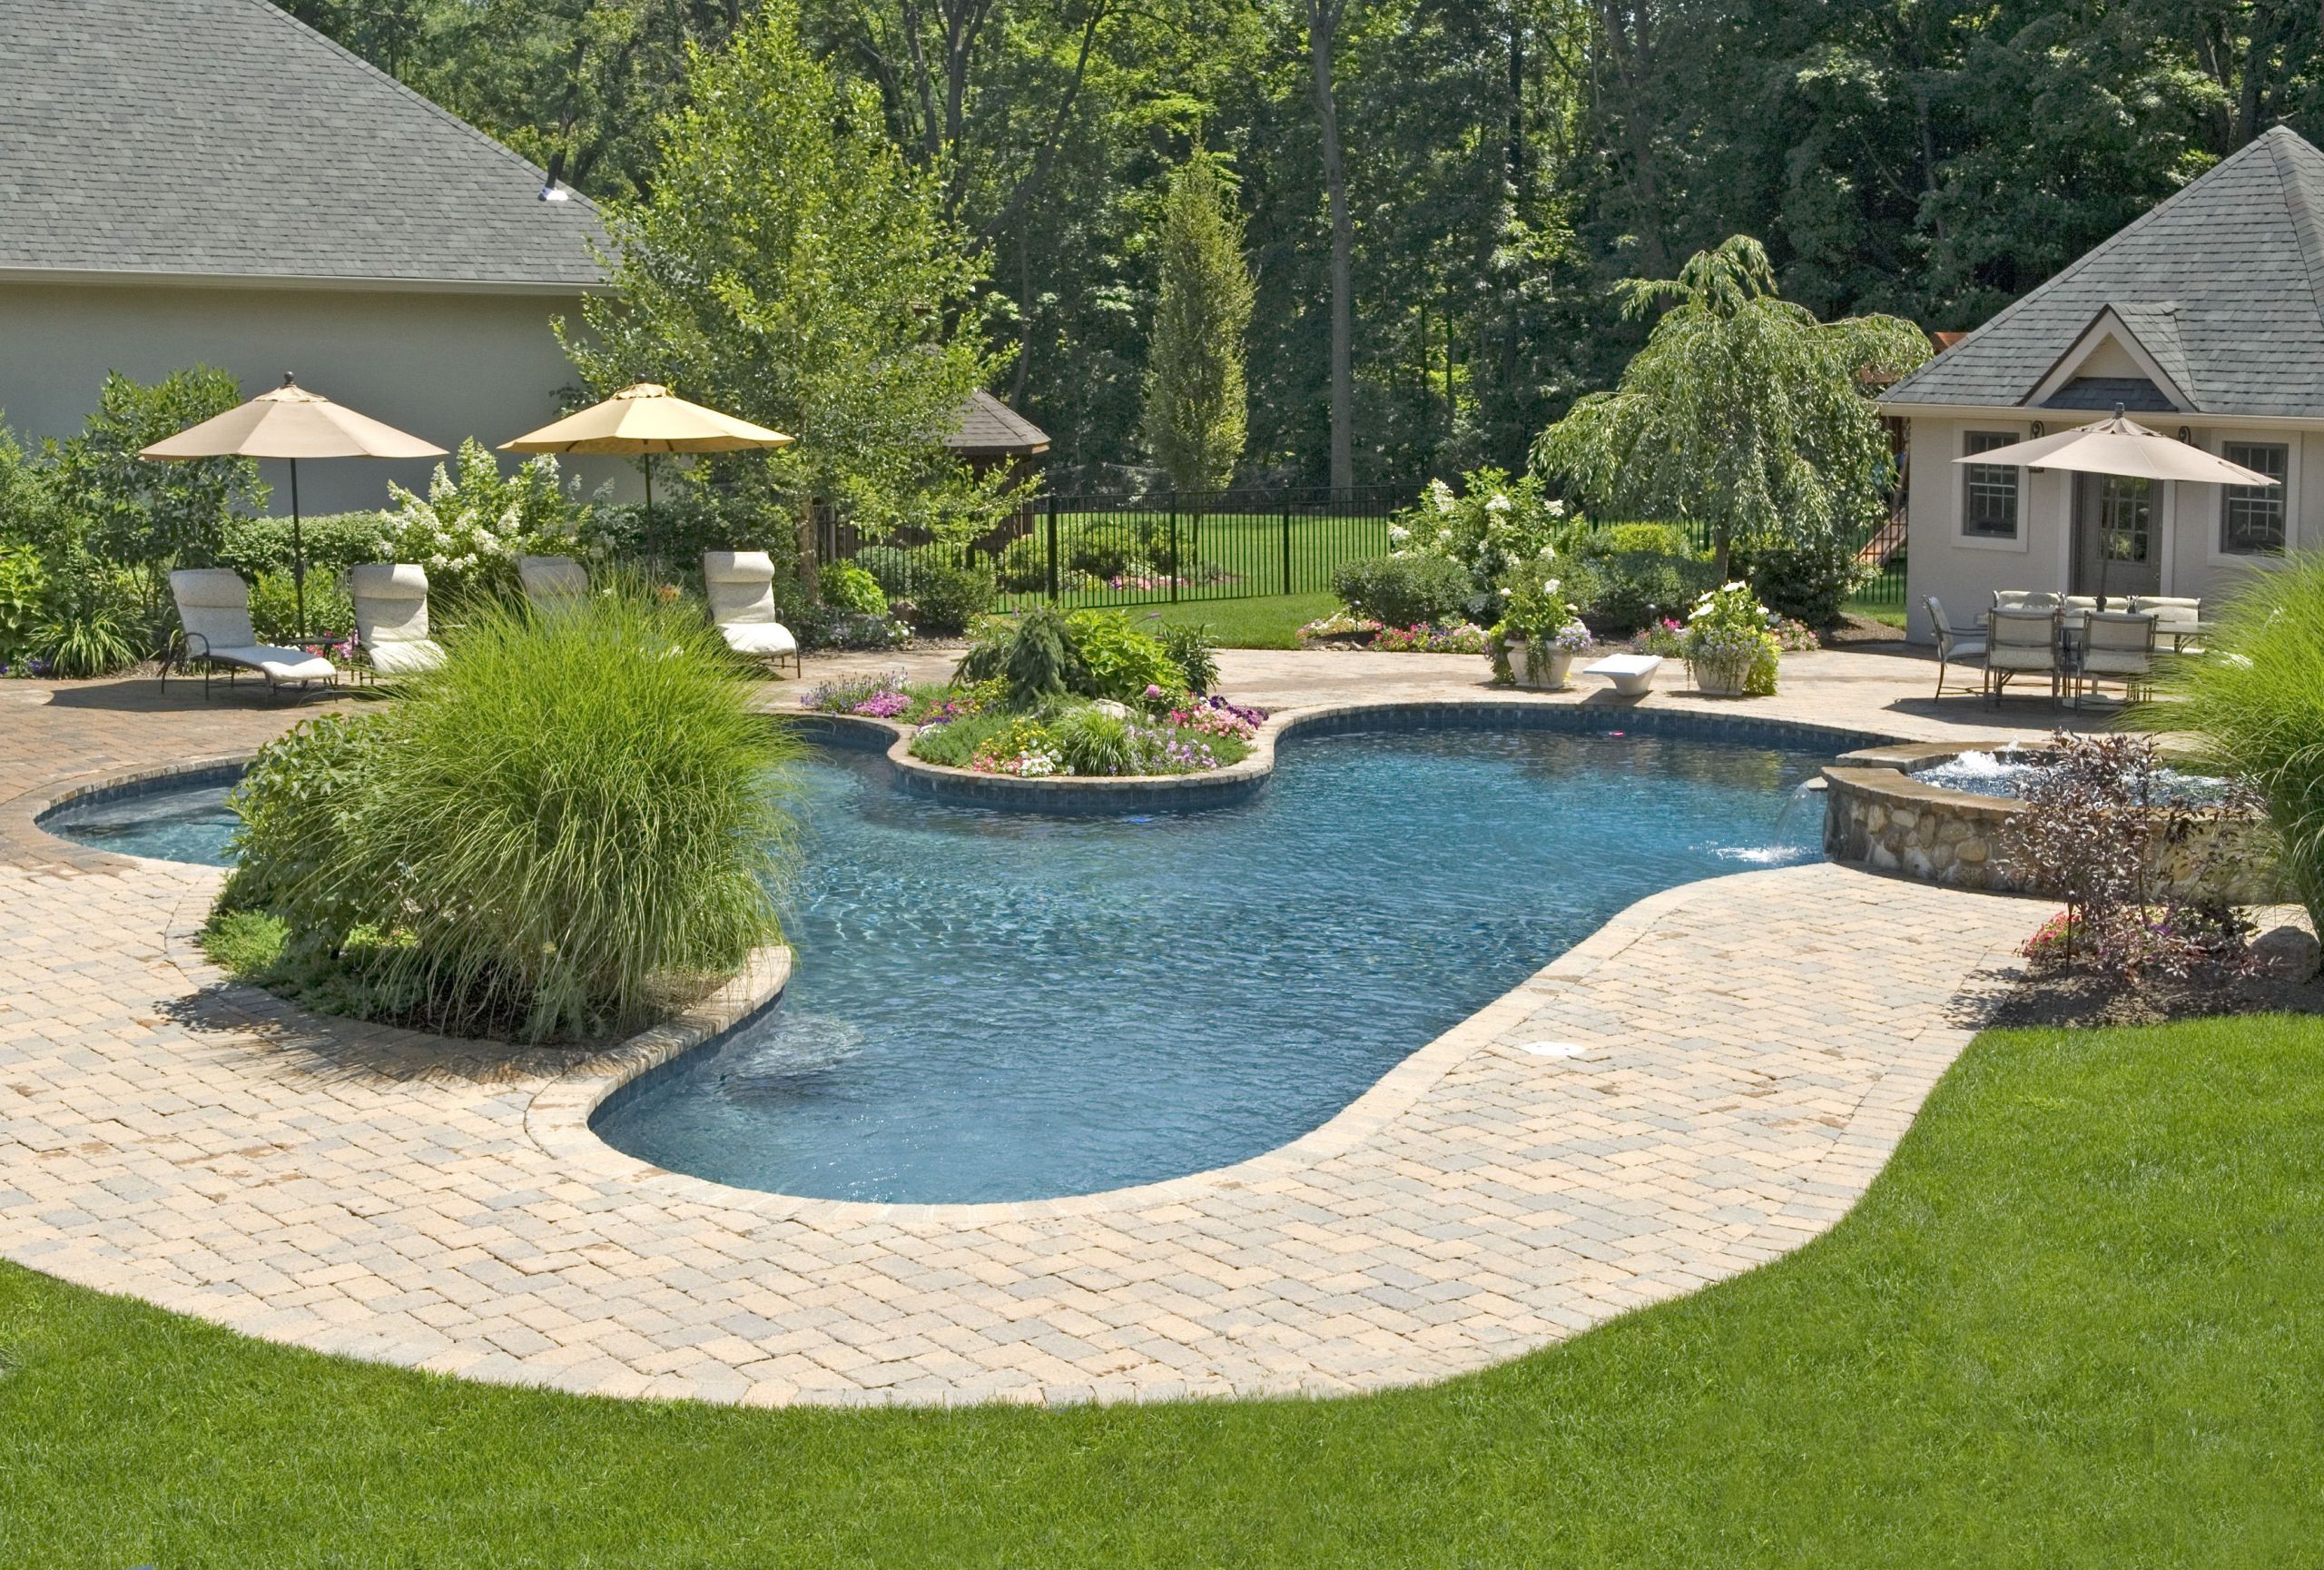 Pool Landscape Design
 Backyard Pool Ideas for a Better Relaxing Station to Try